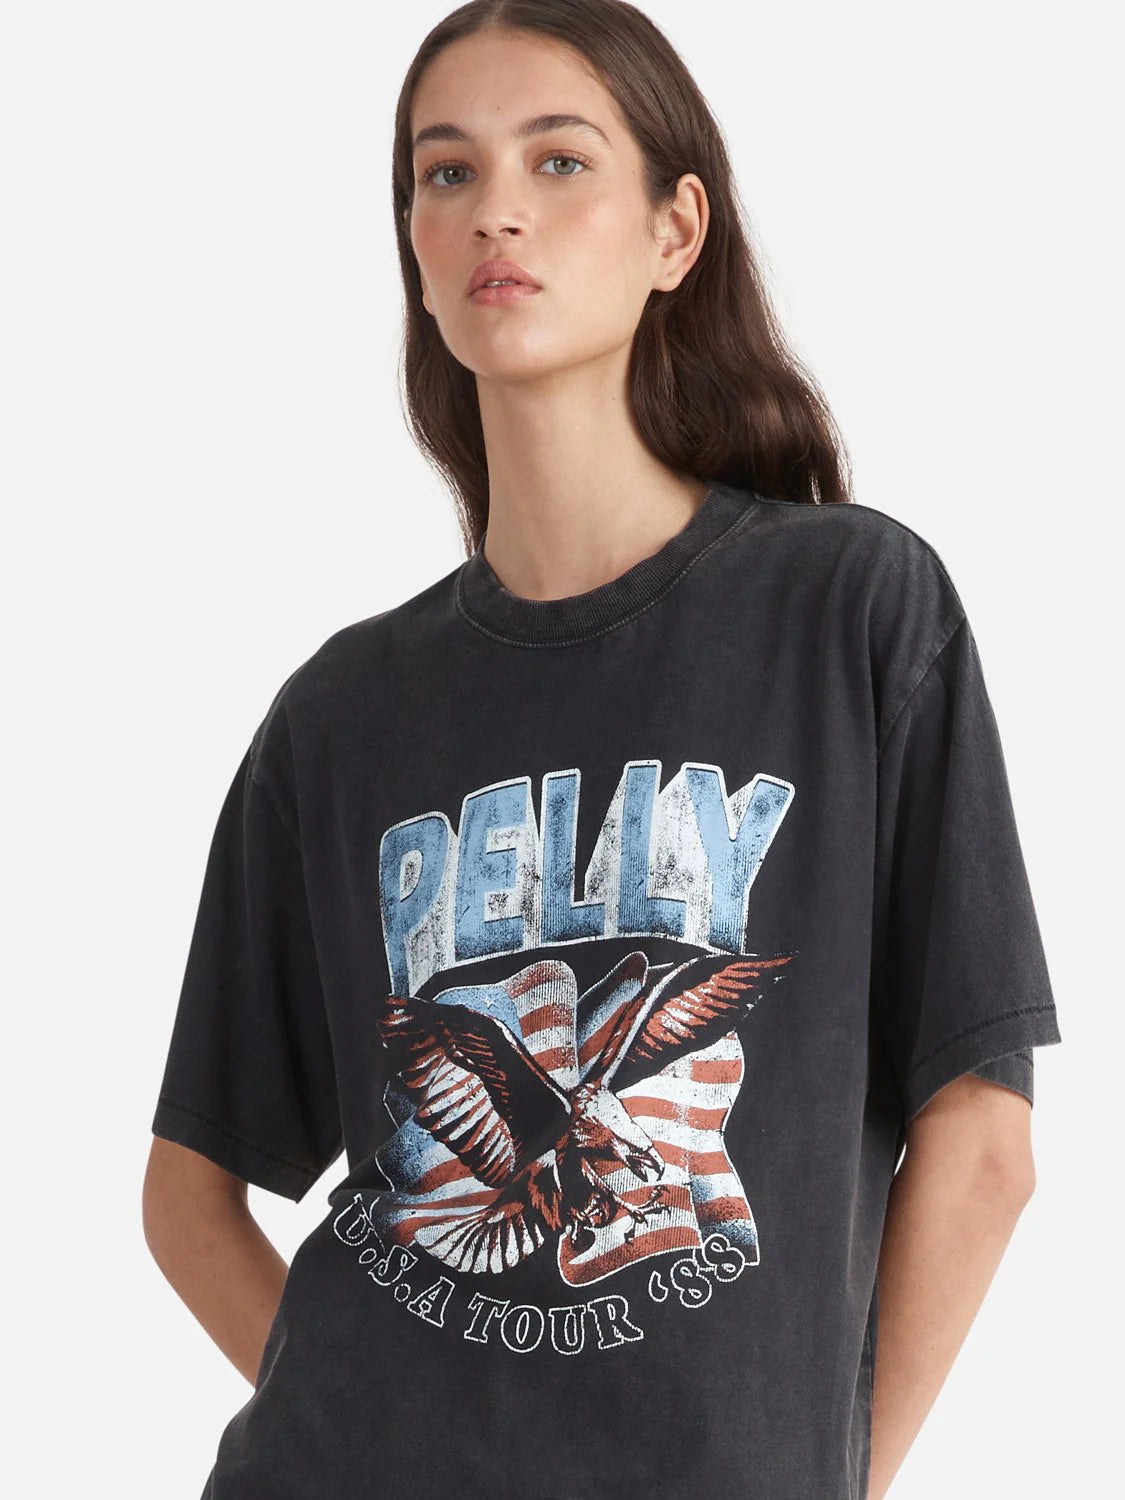 Ena Pelly- Pelly Tour Relaxed Tee-Vintage Black